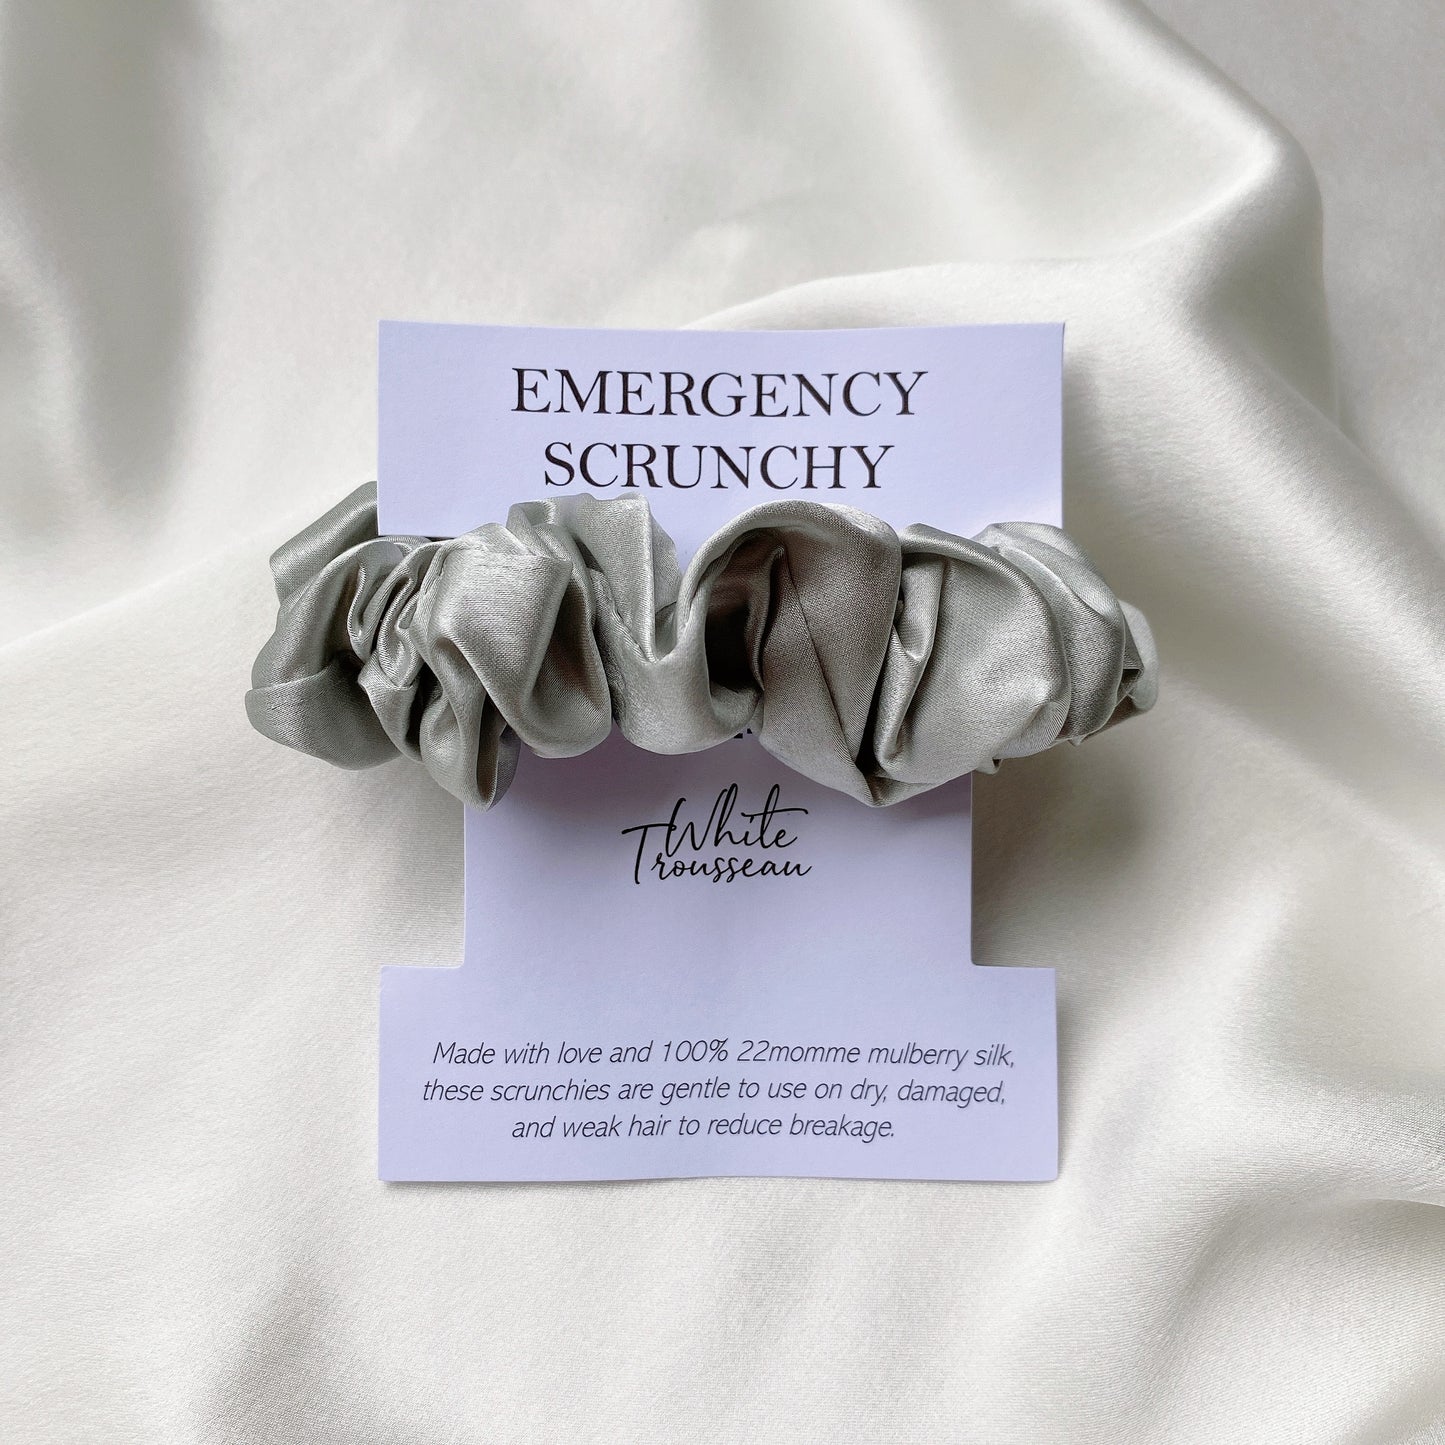 Send our mulberry silk scrunchie with this custom card to someone you know who's suffering from hair loss or breakage to ease their troubles!